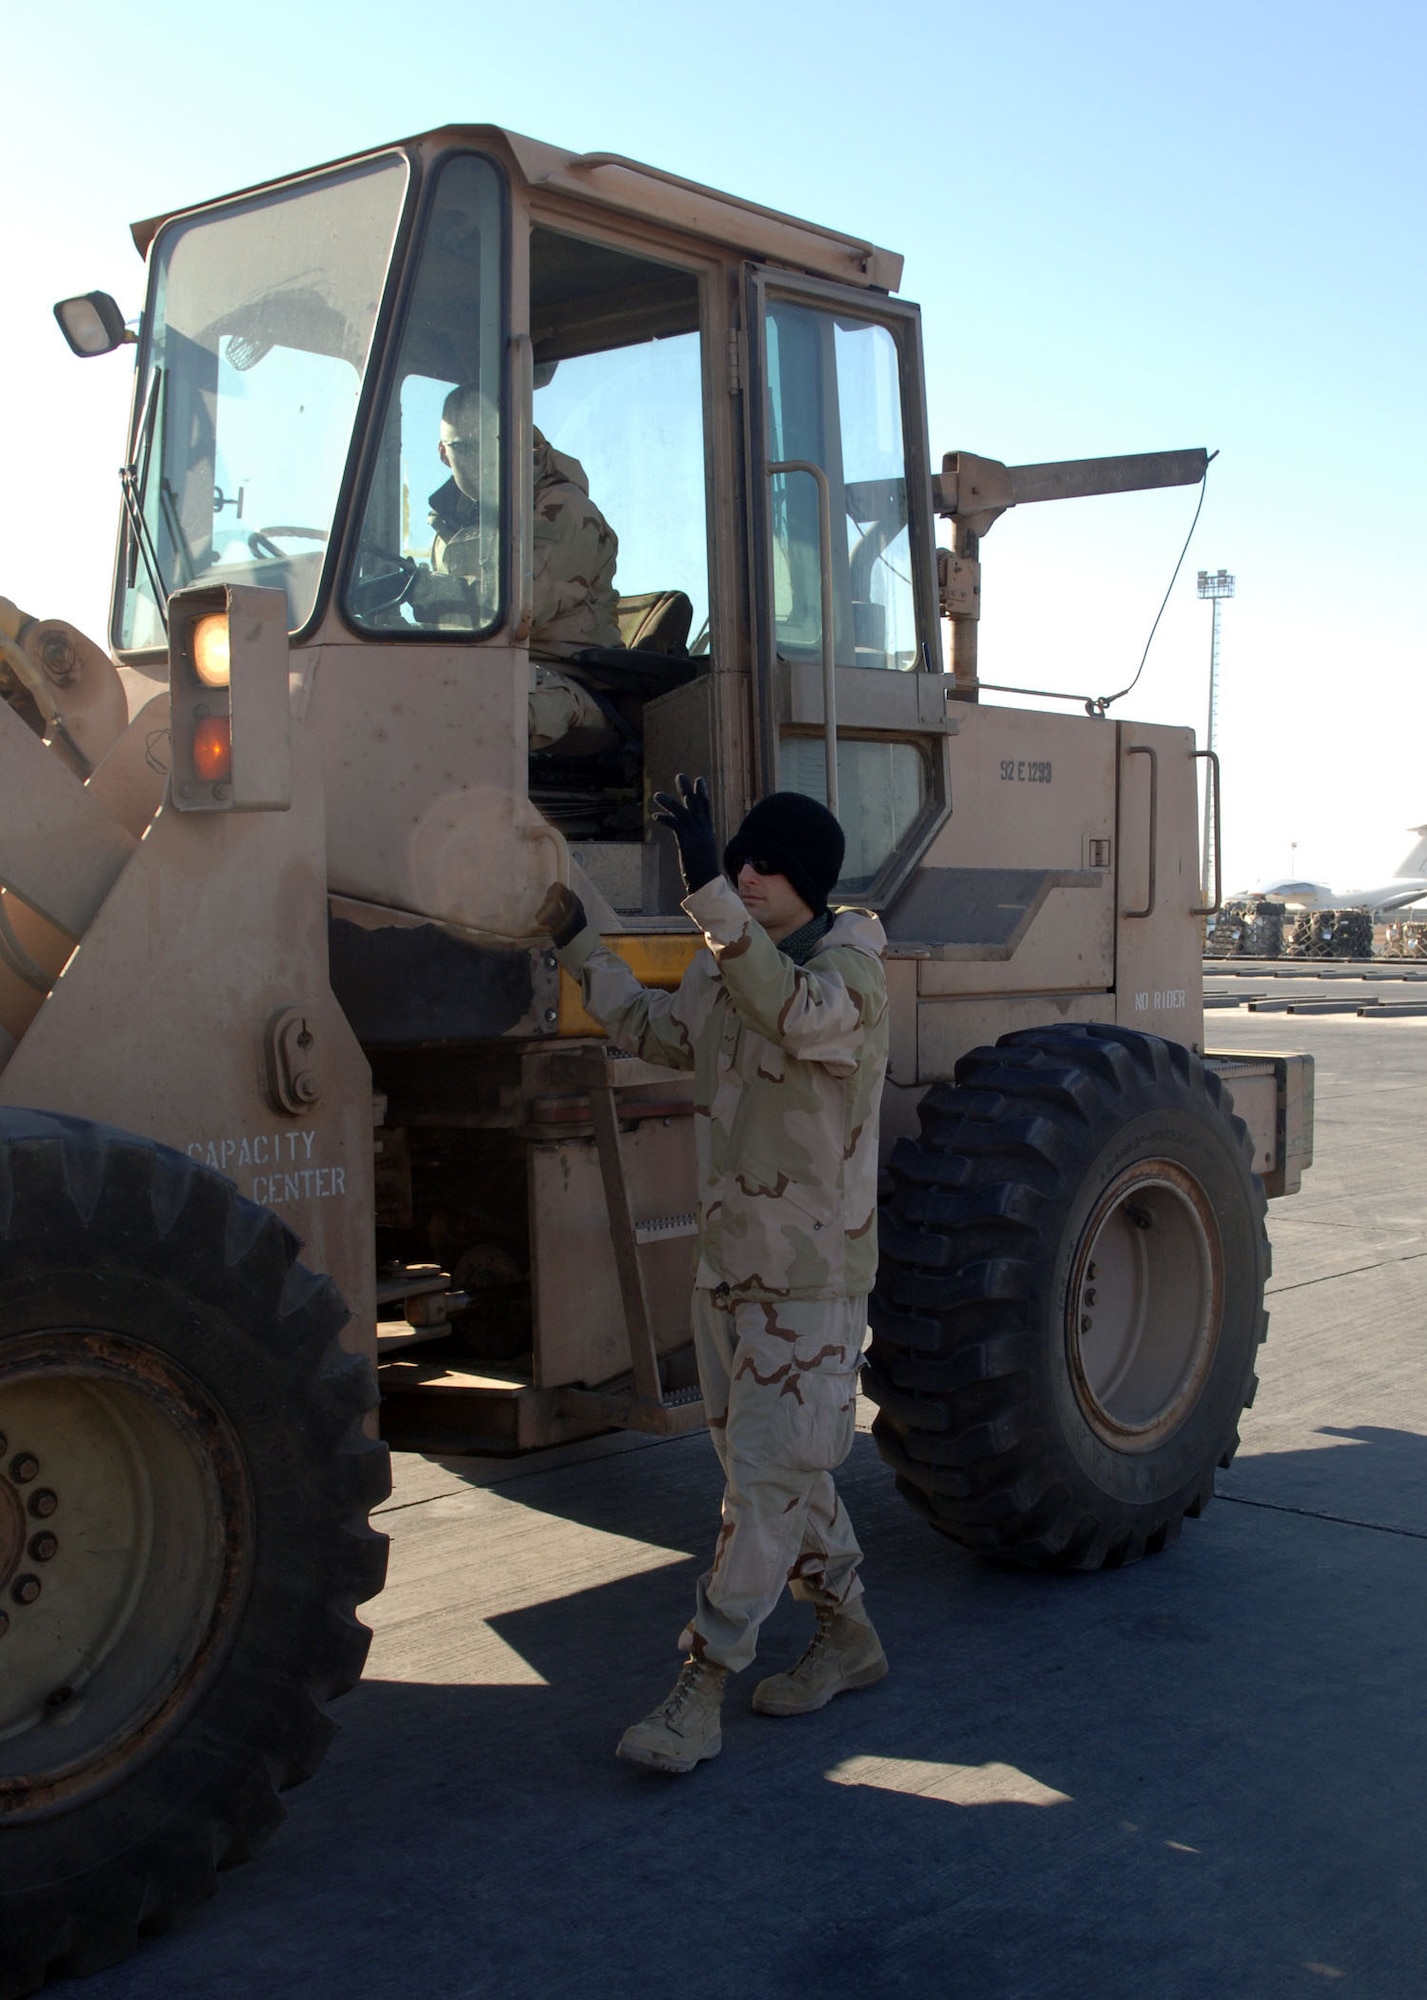 BALAD AIR BASE, Iraq – Airman 1st Class John Rooker, a 332nd Expeditionary Logistics Readiness Squadron Aerial Port Flight transportation specialist, spots a forklift for Airman 1st Class John Lindner, a fellow transportation specialist. Both Airmen are deployed from Pope Air Force Base, N.C. (U.S. Air Force photo/Senior Airman Terri Barriere)